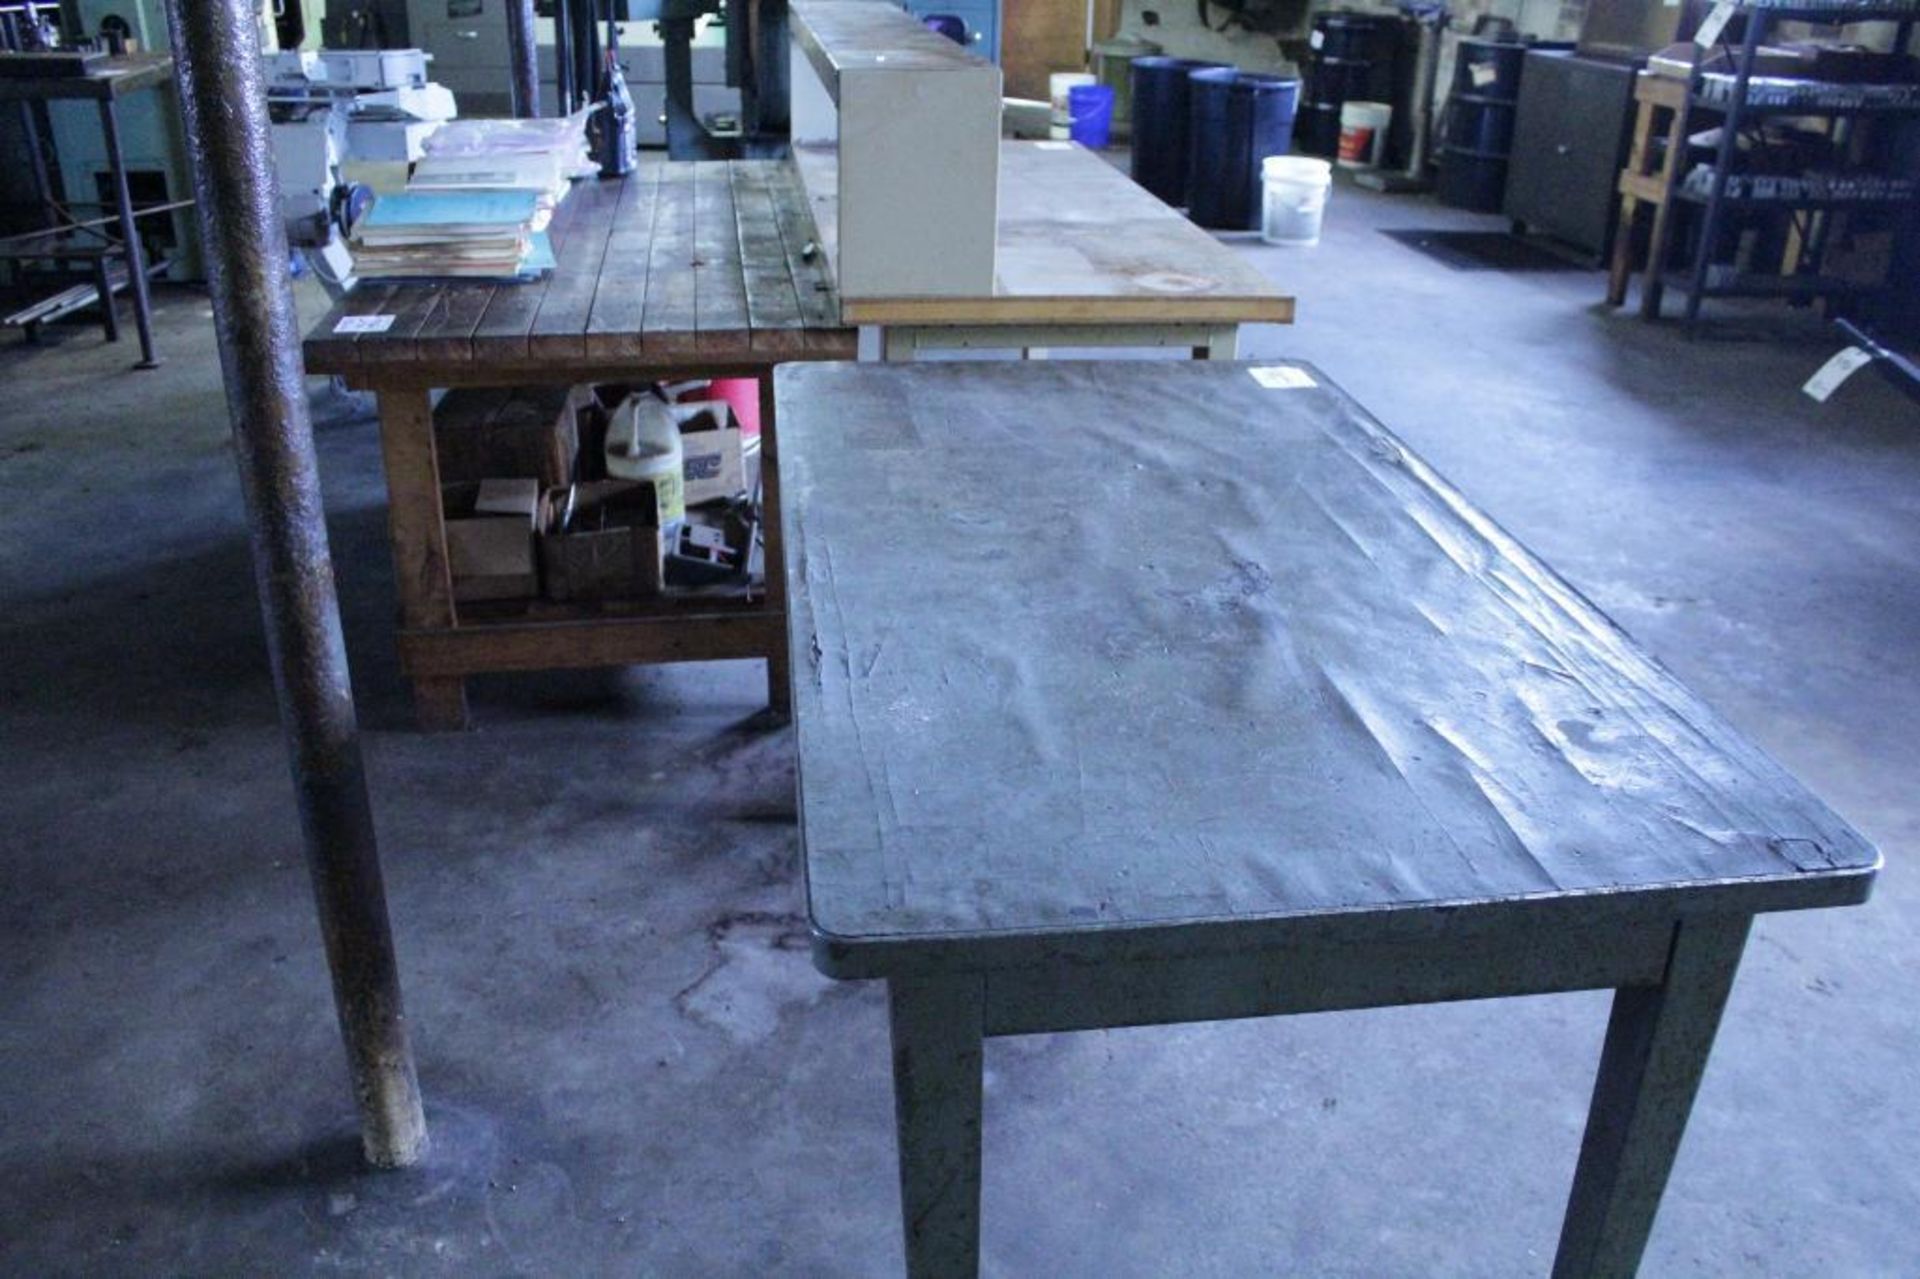 Work benches - Image 2 of 3